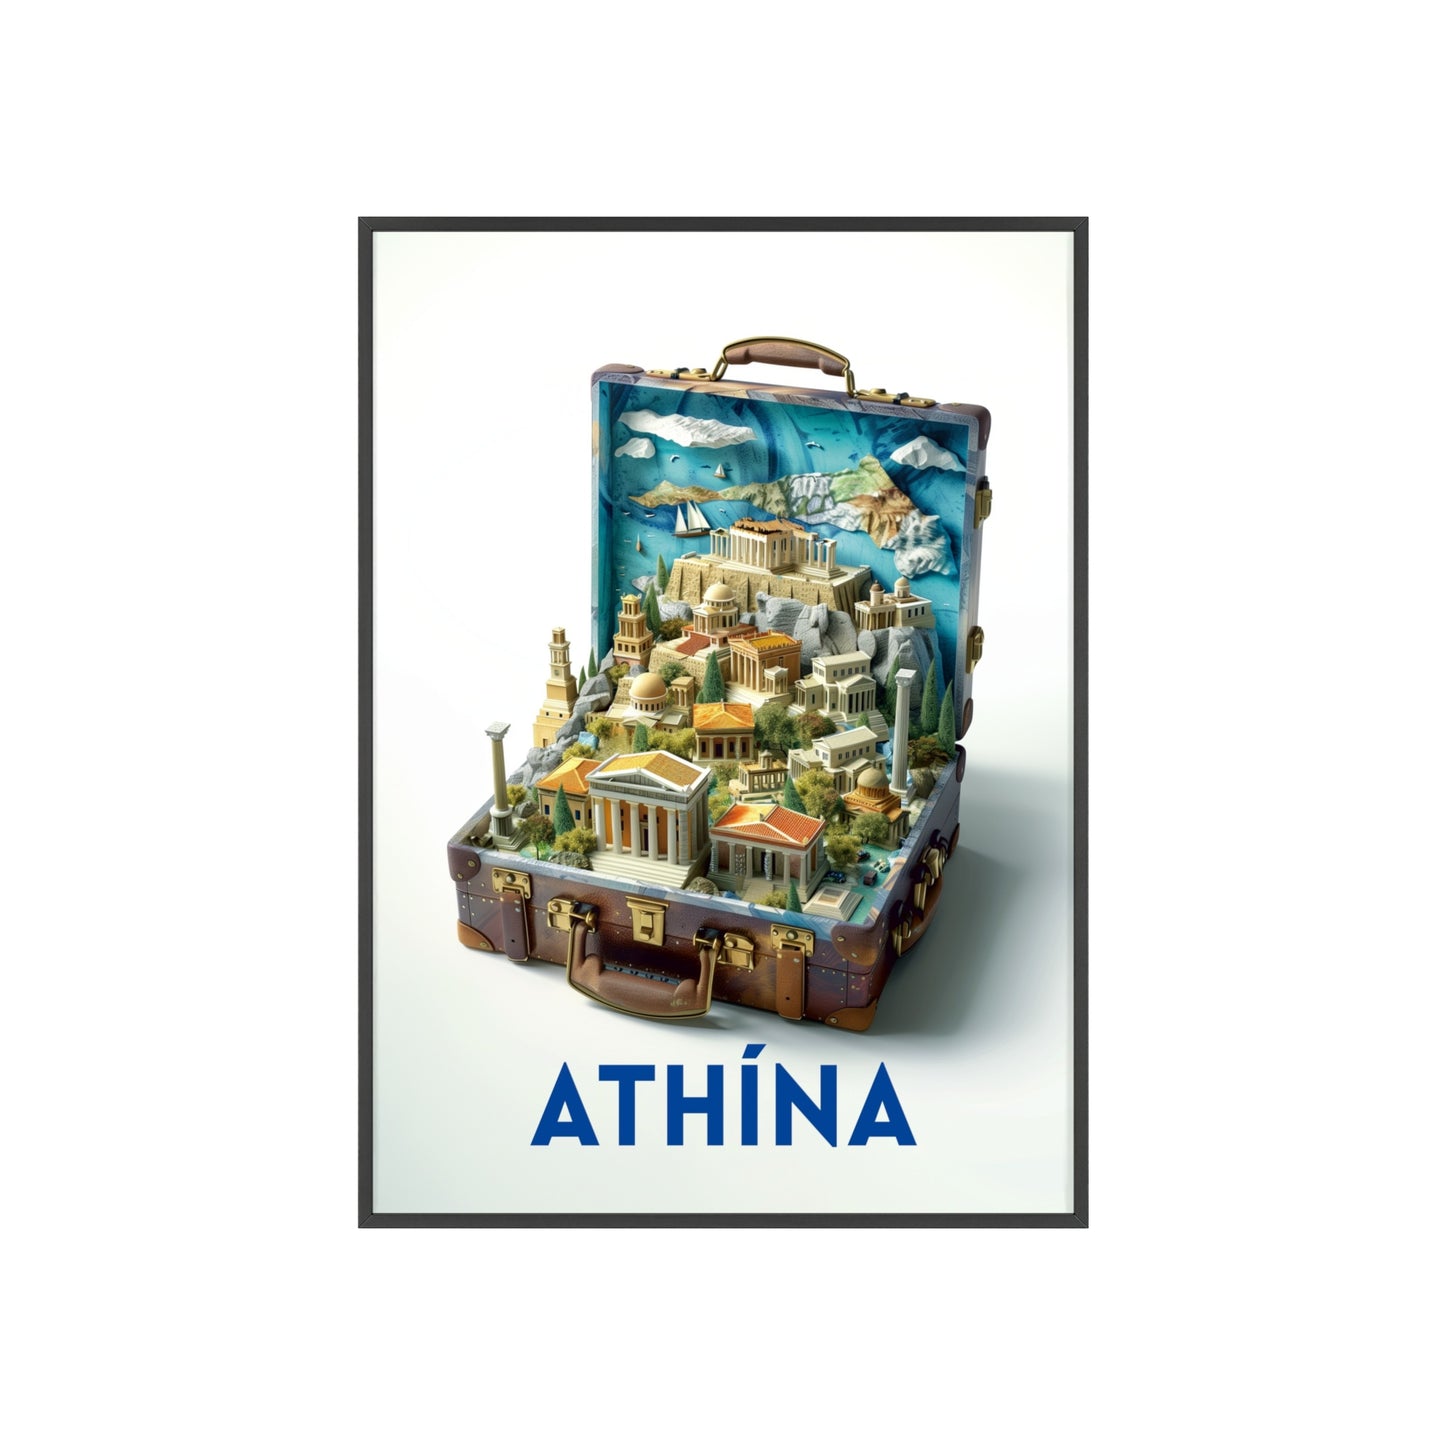 Ancient Athens in a Suitcase travel poster featuring iconic landmarks, inspiring wanderlust and a love for timeless travel